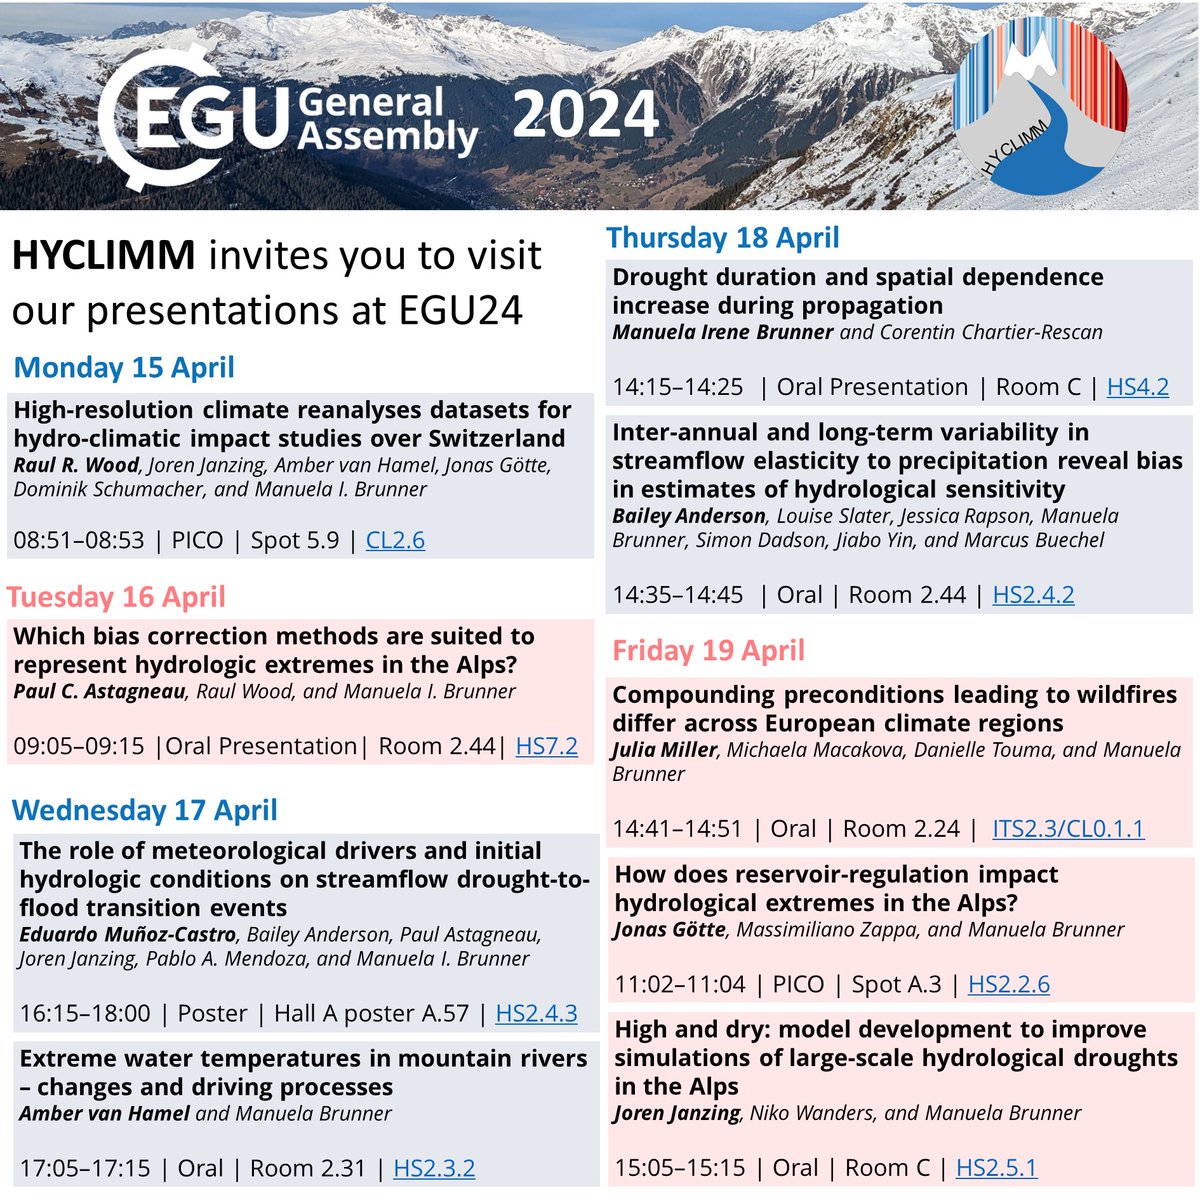 HYCLIMM will be presenting 9 different talks and posters at EGU24. We hope to see you in Vienna!